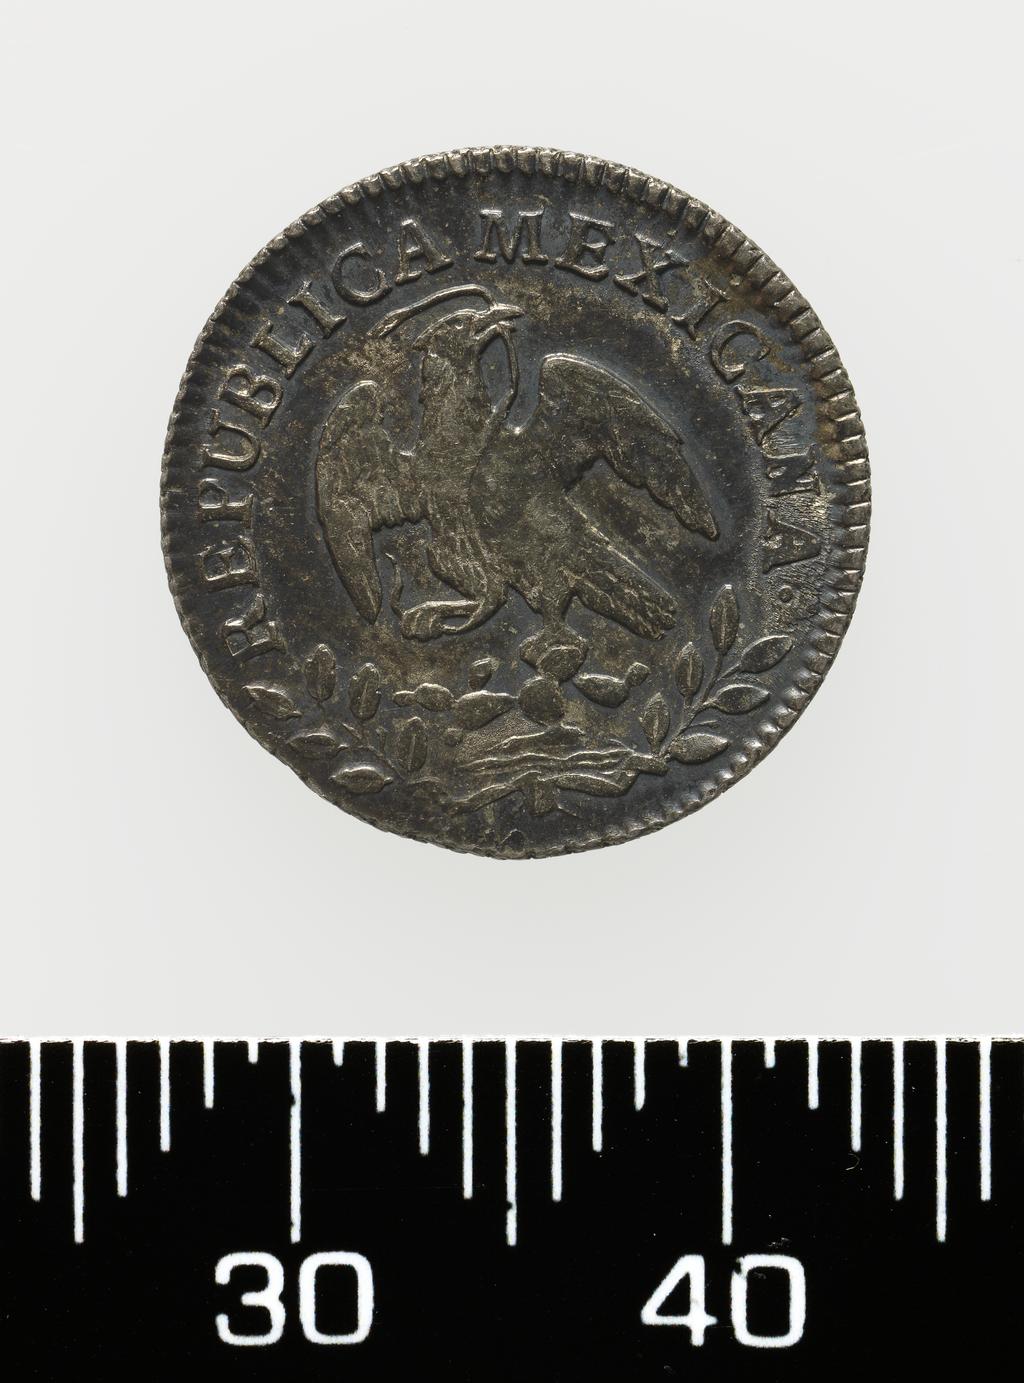 An image of Coinage. Half Real. Mexico City mint. Silver, milled, diameter 17 mm, 1858. Acquisition: On loan from Queens' College Cambridge. Alternative Number: Q-4928.